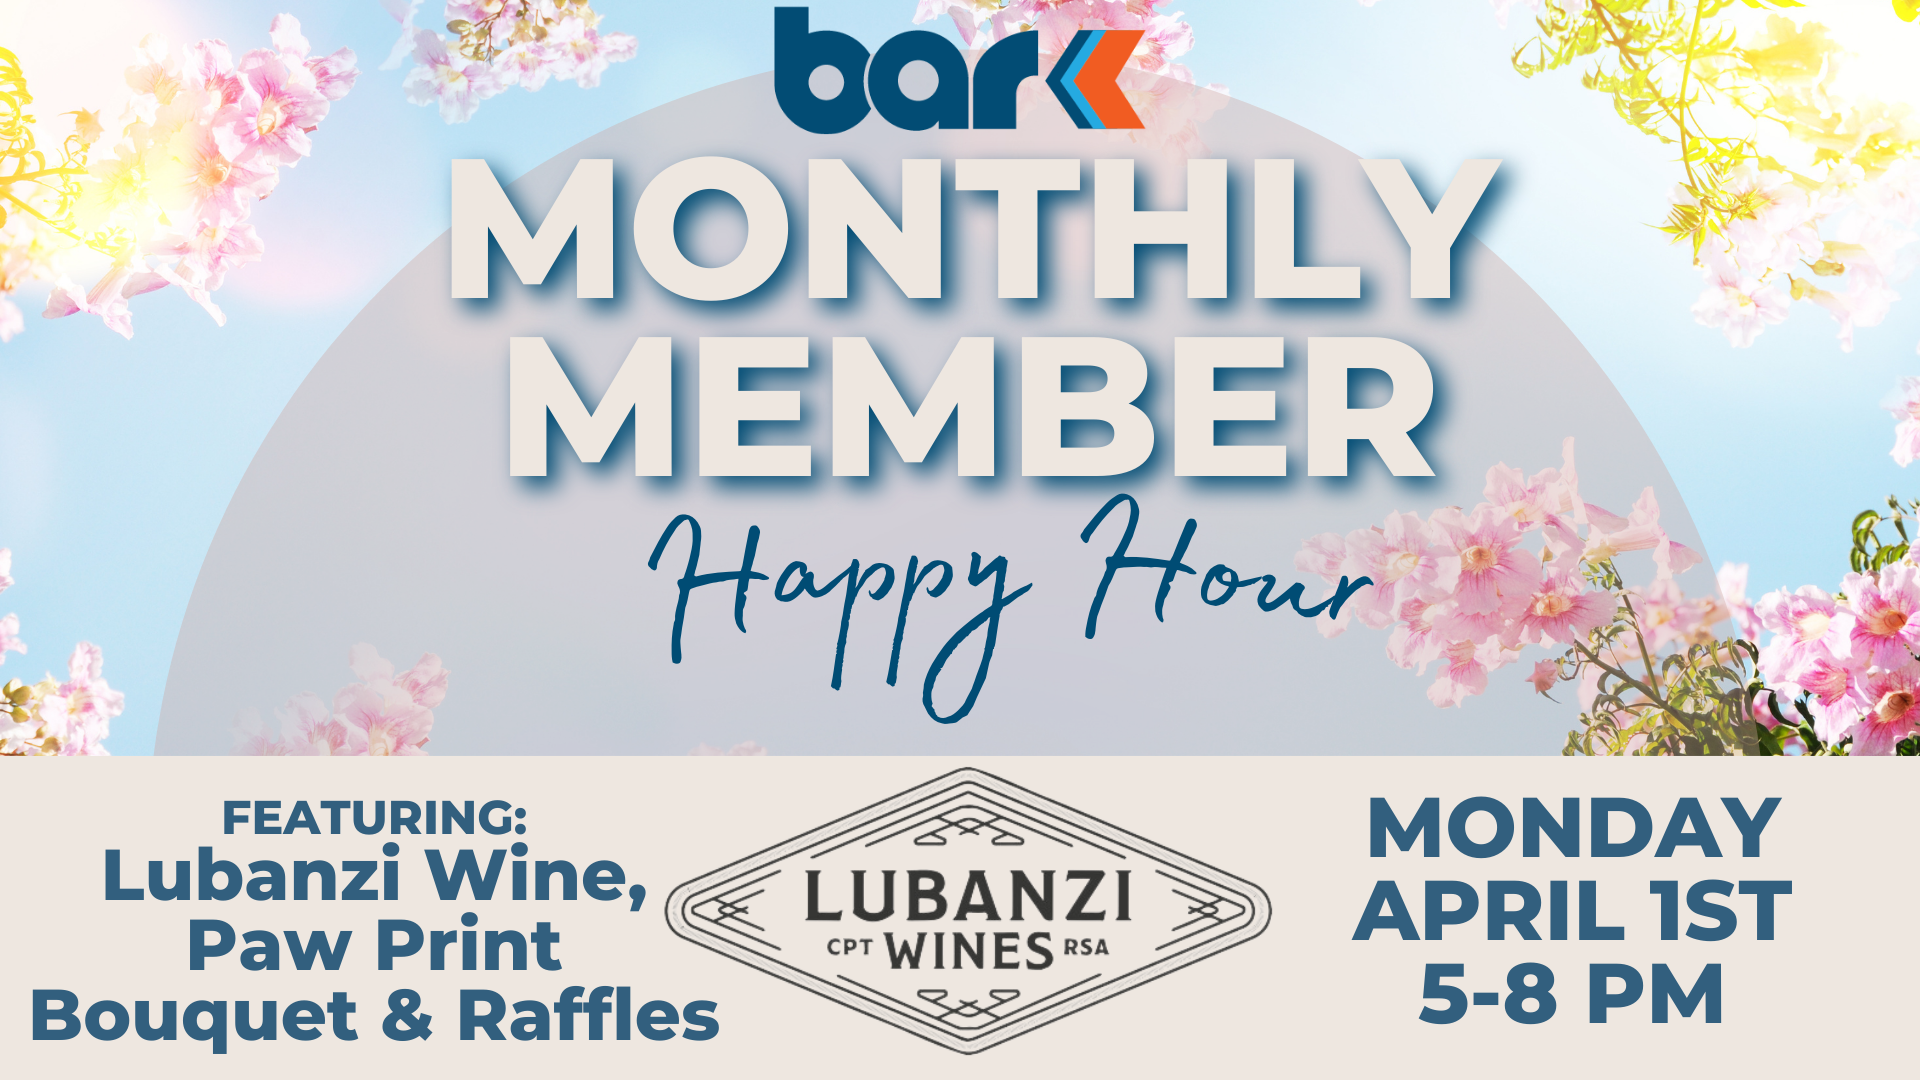 Bar K monthly member happy hour. Featuring lubanzi wine, paw print bouquet, and raffles. Monday, April 1st from 5 to 8 pm.